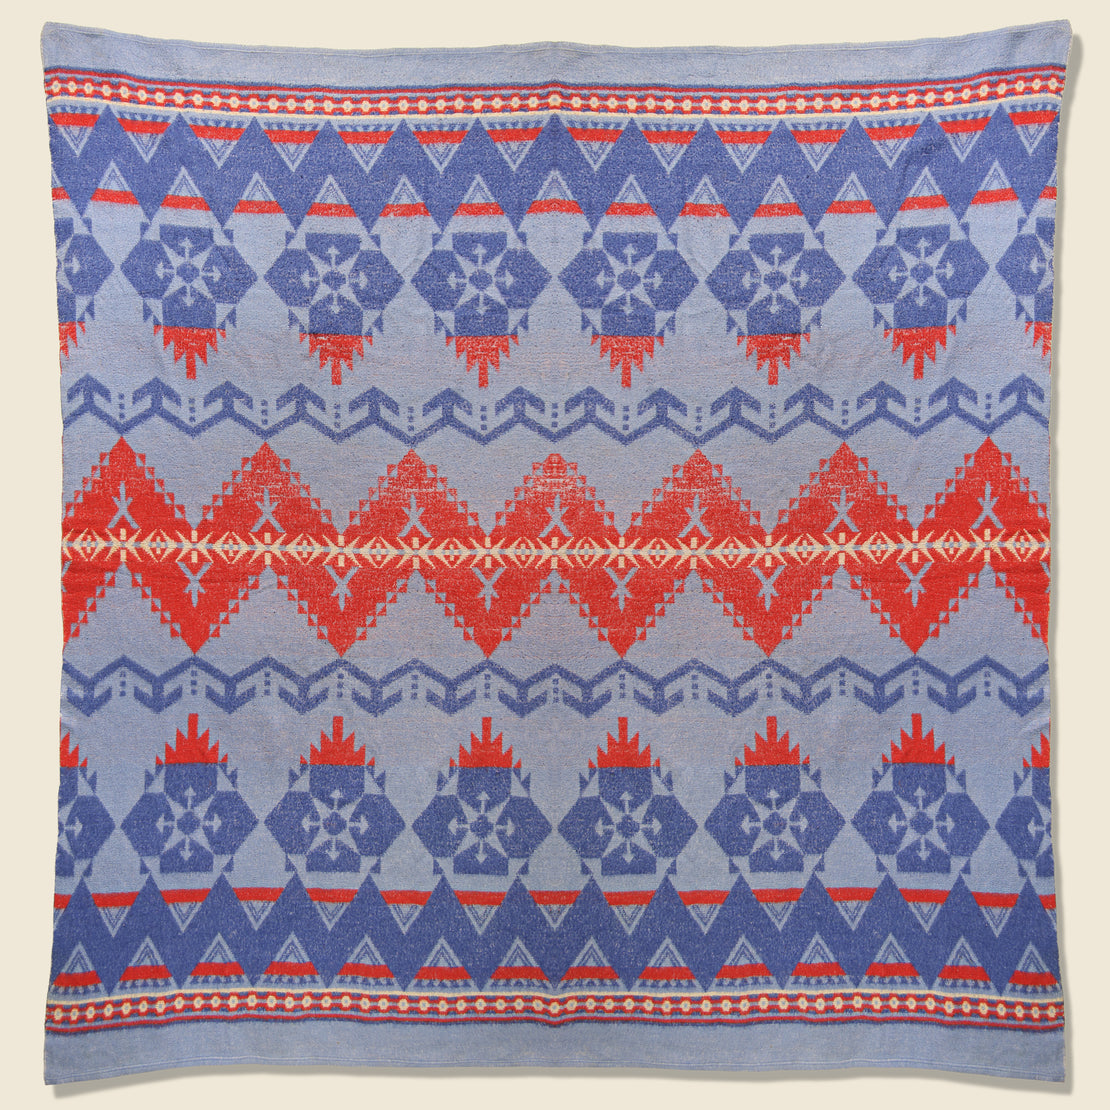 Flannel Camp Blanket - Blue/Red - Vintage - STAG Provisions - One & Done - Blankets & Textiles